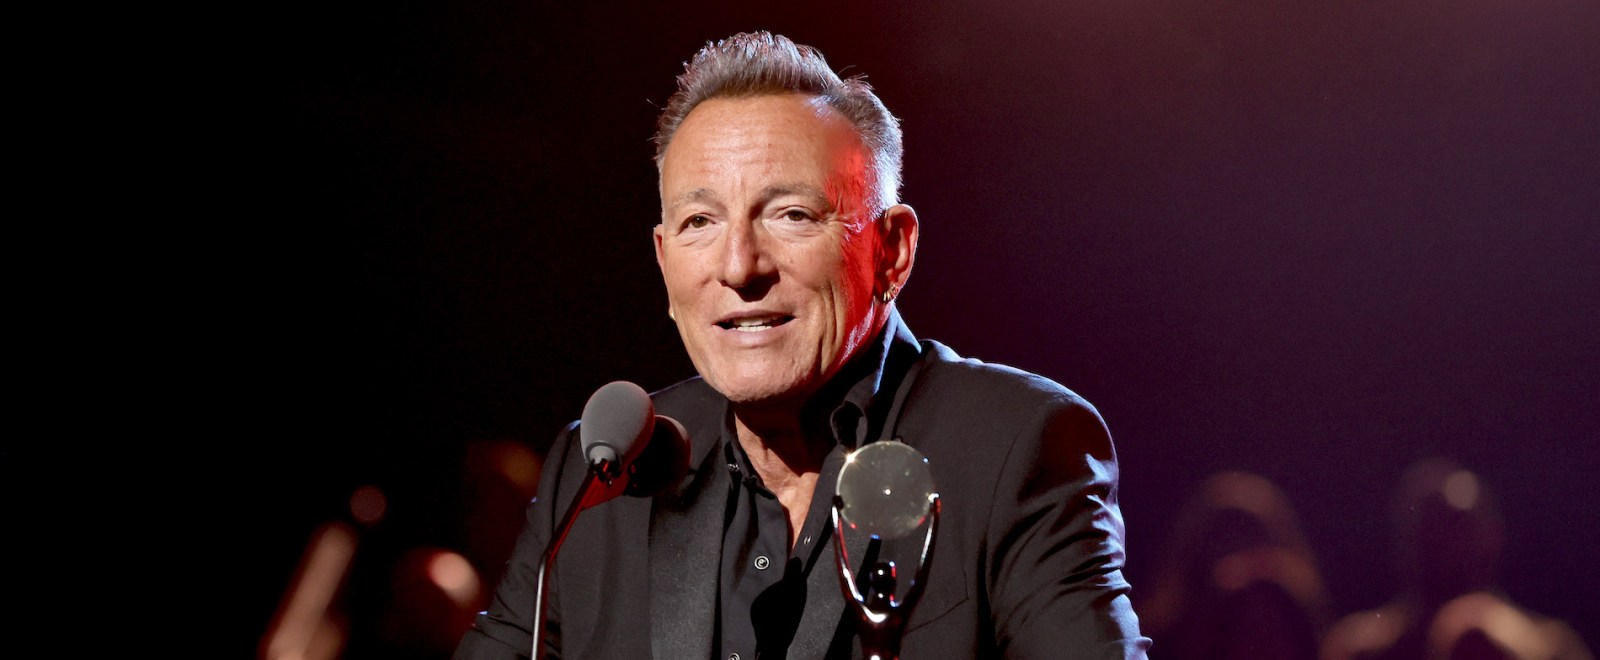 Bruce Springsteen 37th Annual Rock & Roll Hall of Fame Induction Ceremony 2022